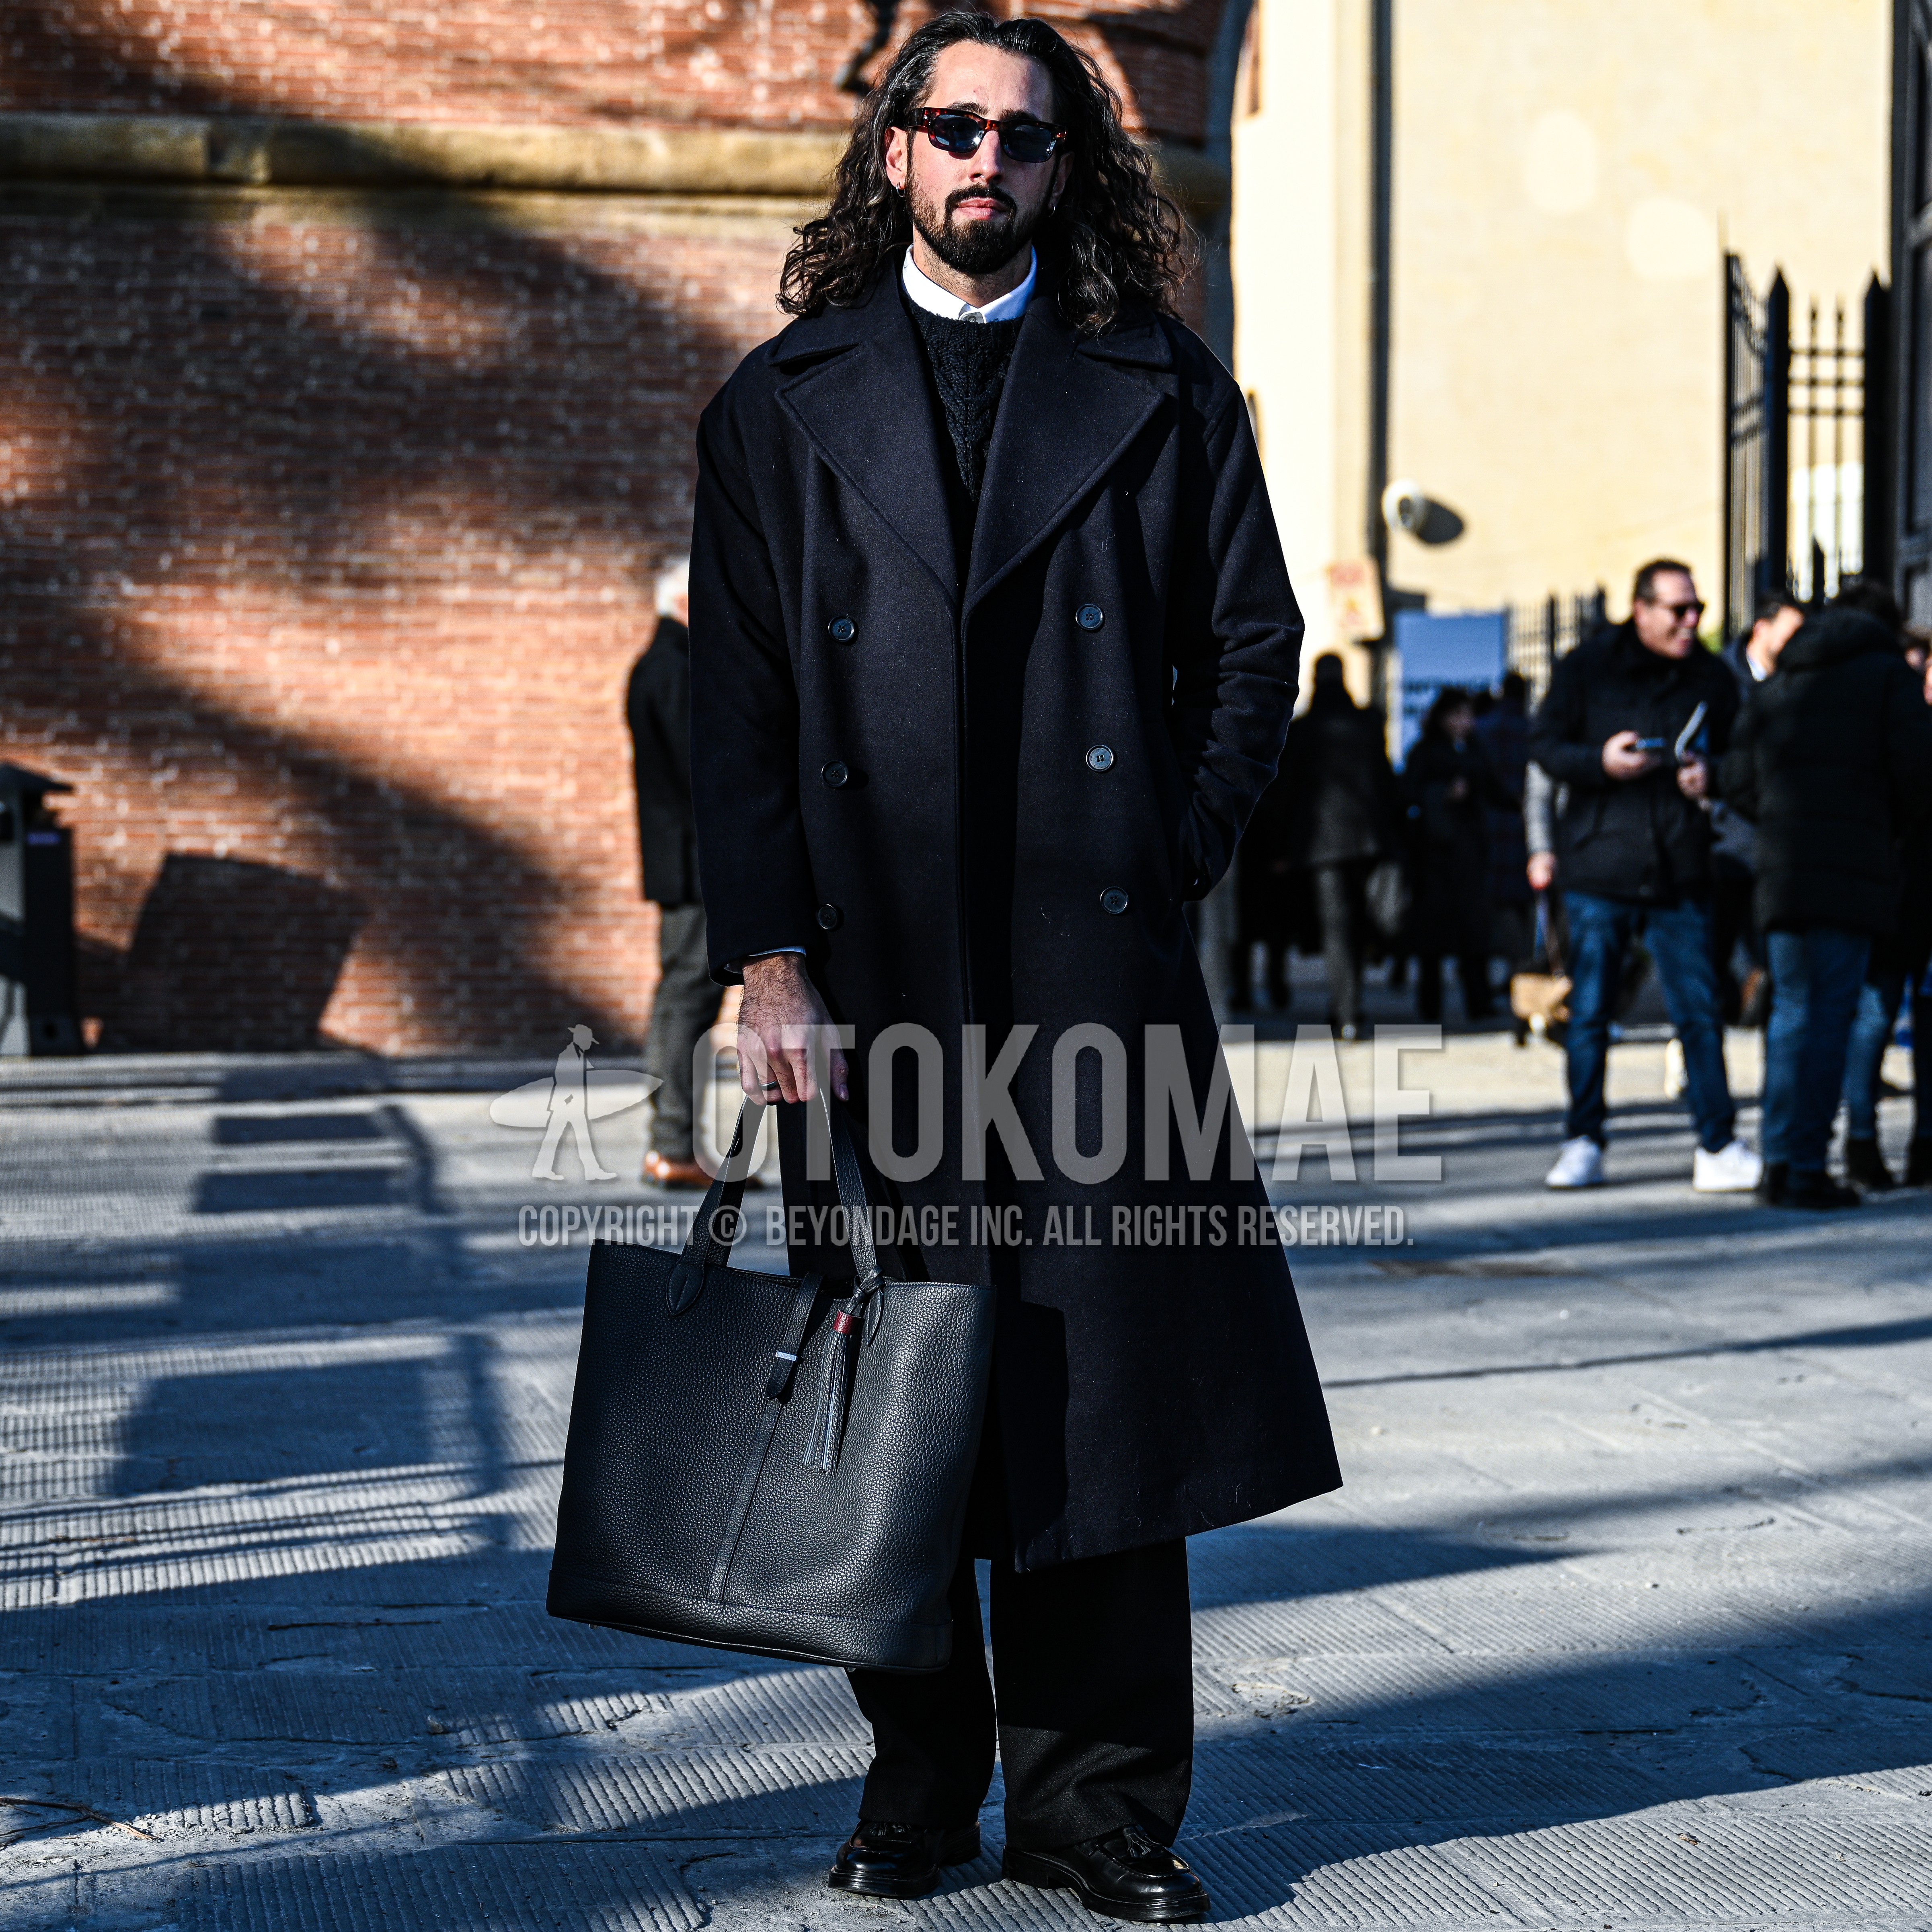 Men's autumn winter outfit with tortoiseshell sunglasses, navy plain ulster coat, white plain shirt, black plain sweater, black plain slacks, black tassel loafers leather shoes, black plain tote bag.